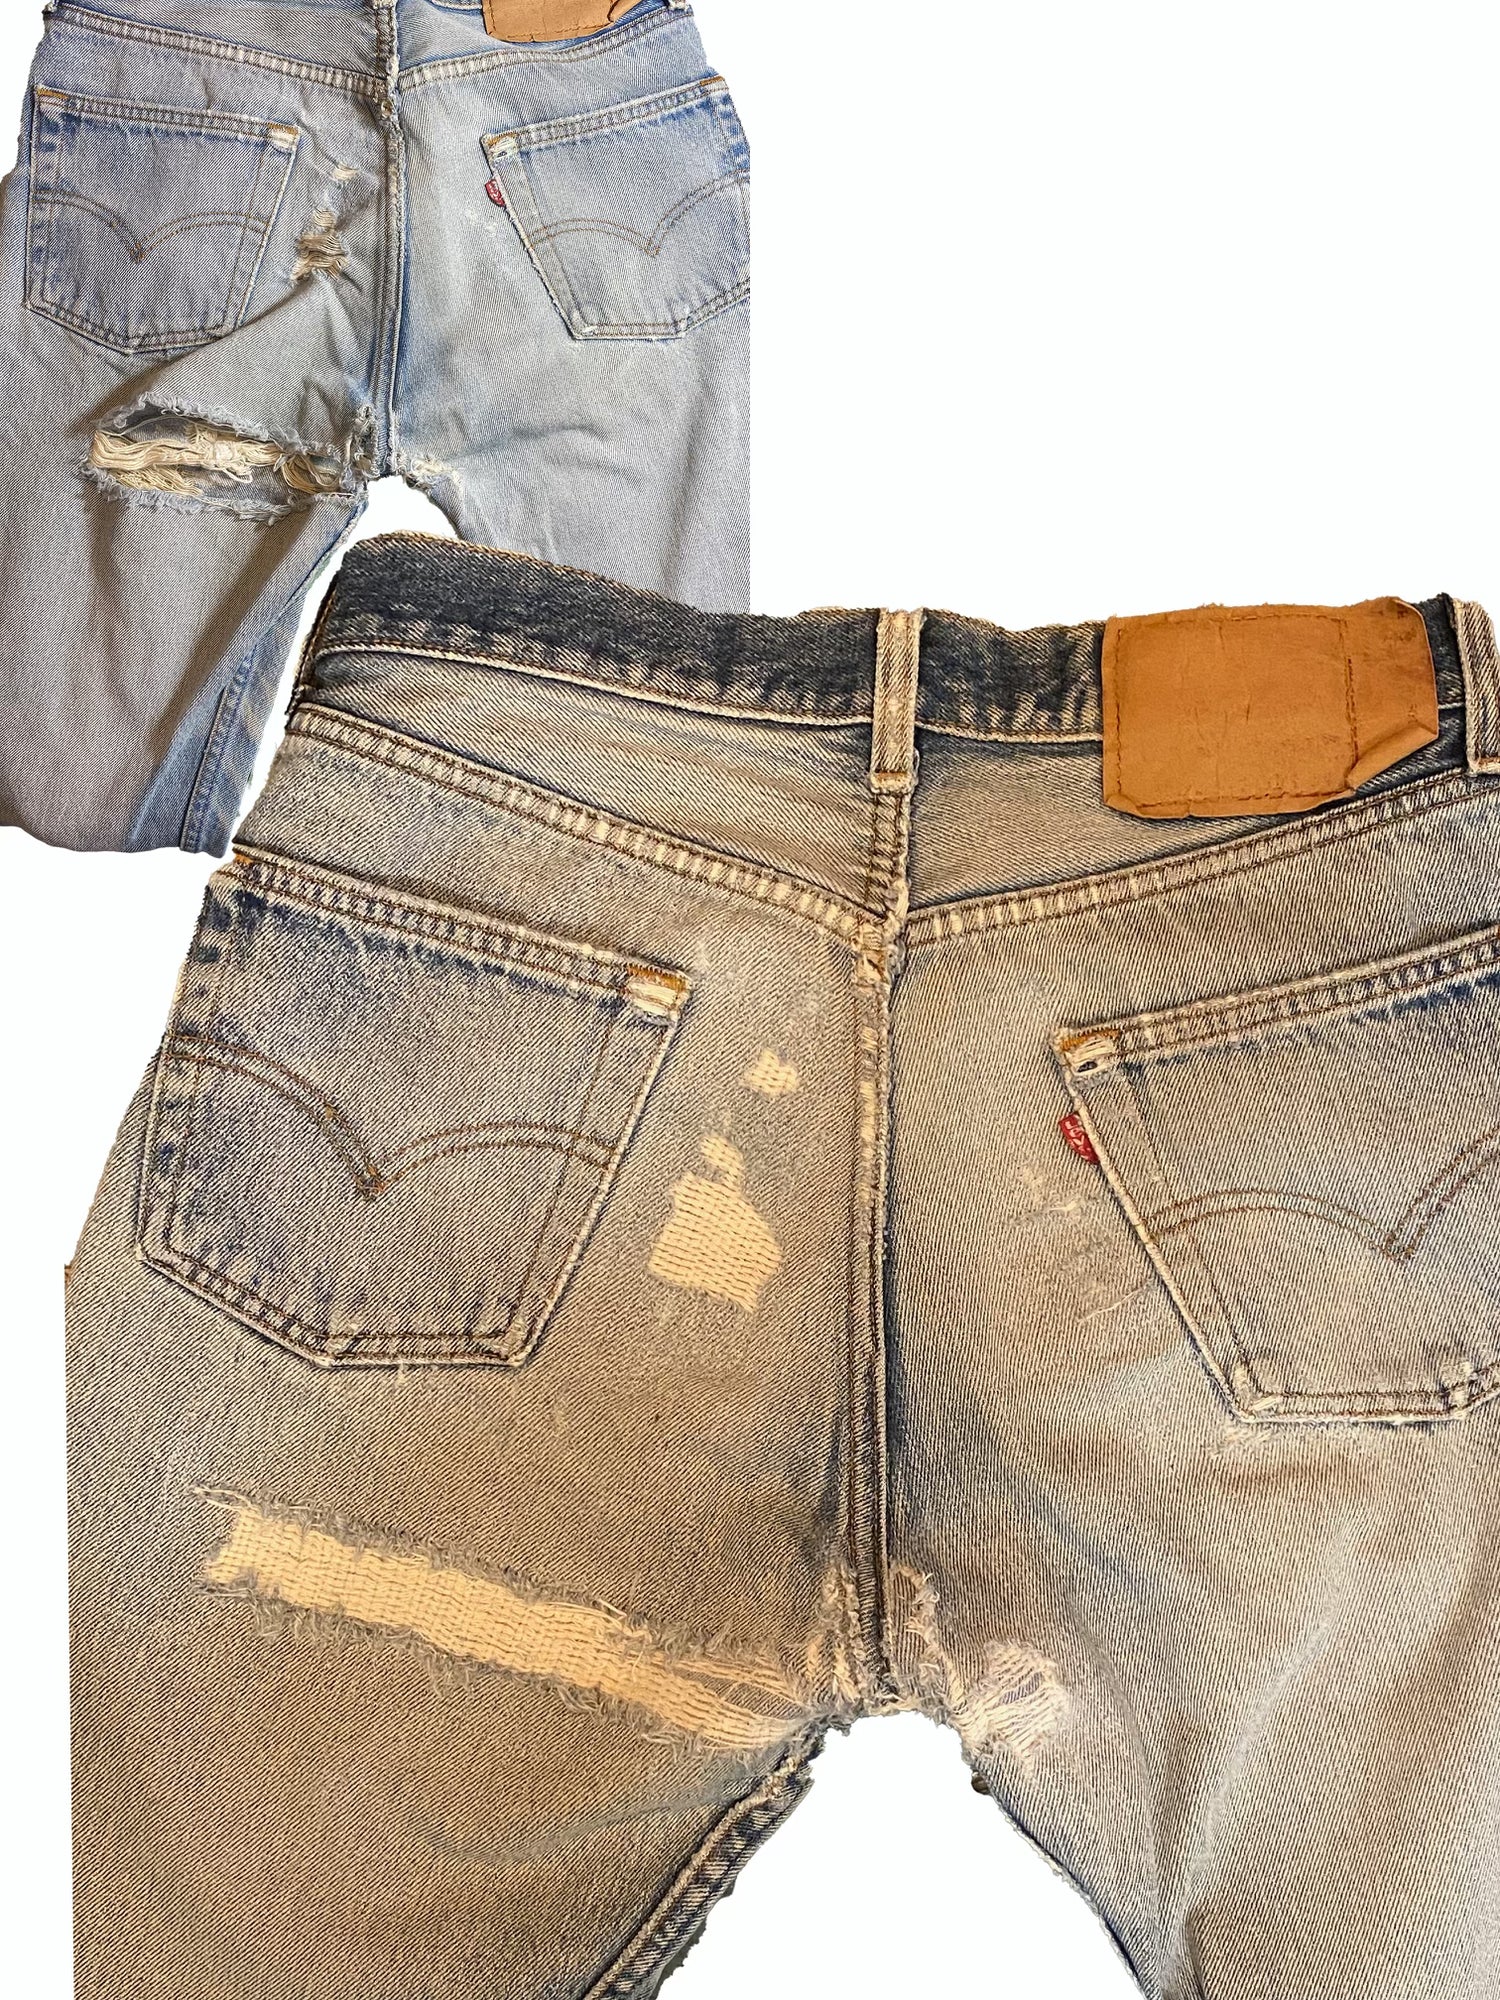 before and after photos of denim repair 